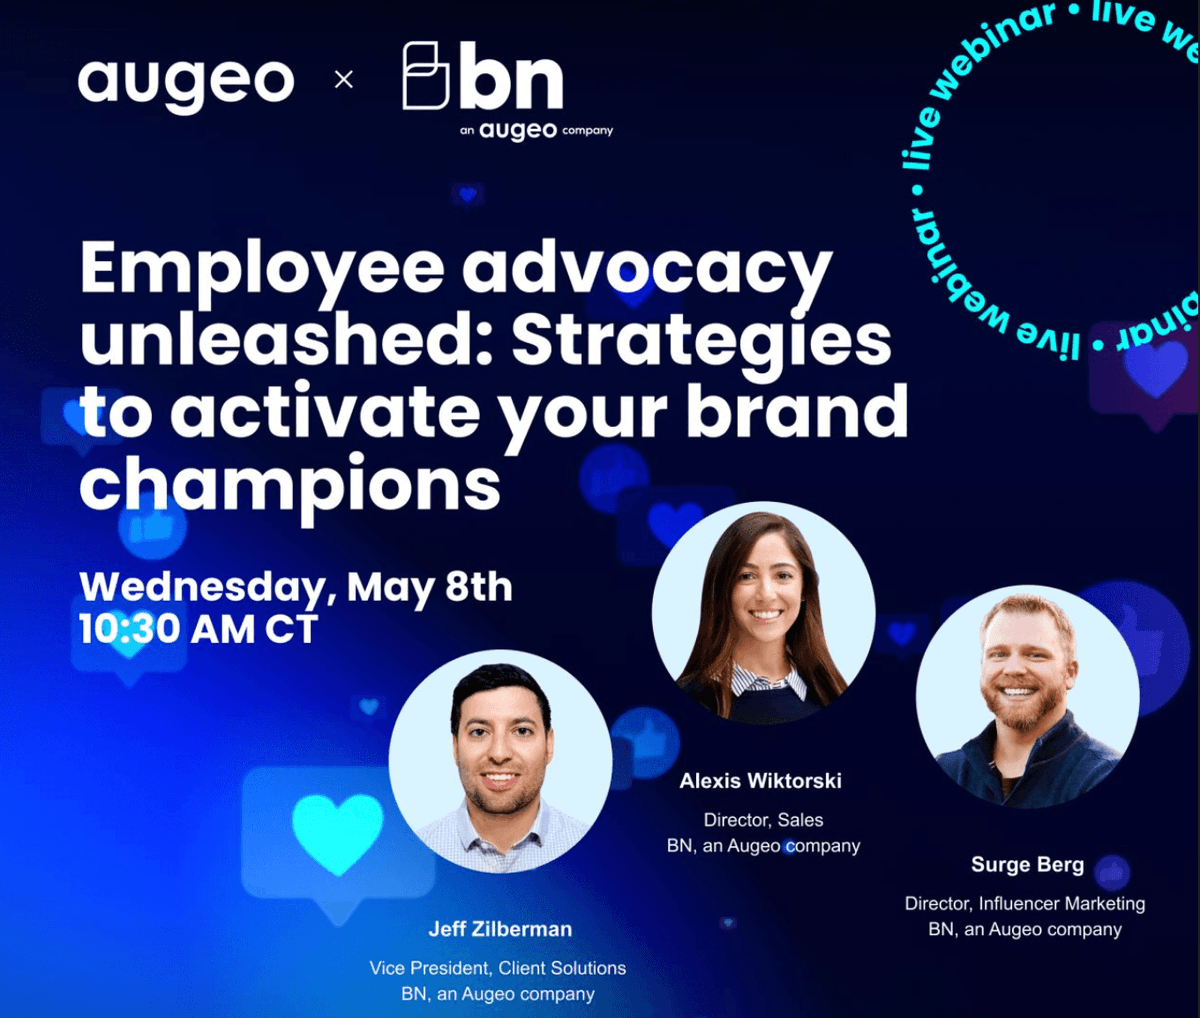 Just a few more days away… what questions should we answer regarding social media and employee advocacy!?  #EmployeeAdvocacy #WebinarSeries #AugeoUnleashed augeo.zoom.us/webinar/regist…